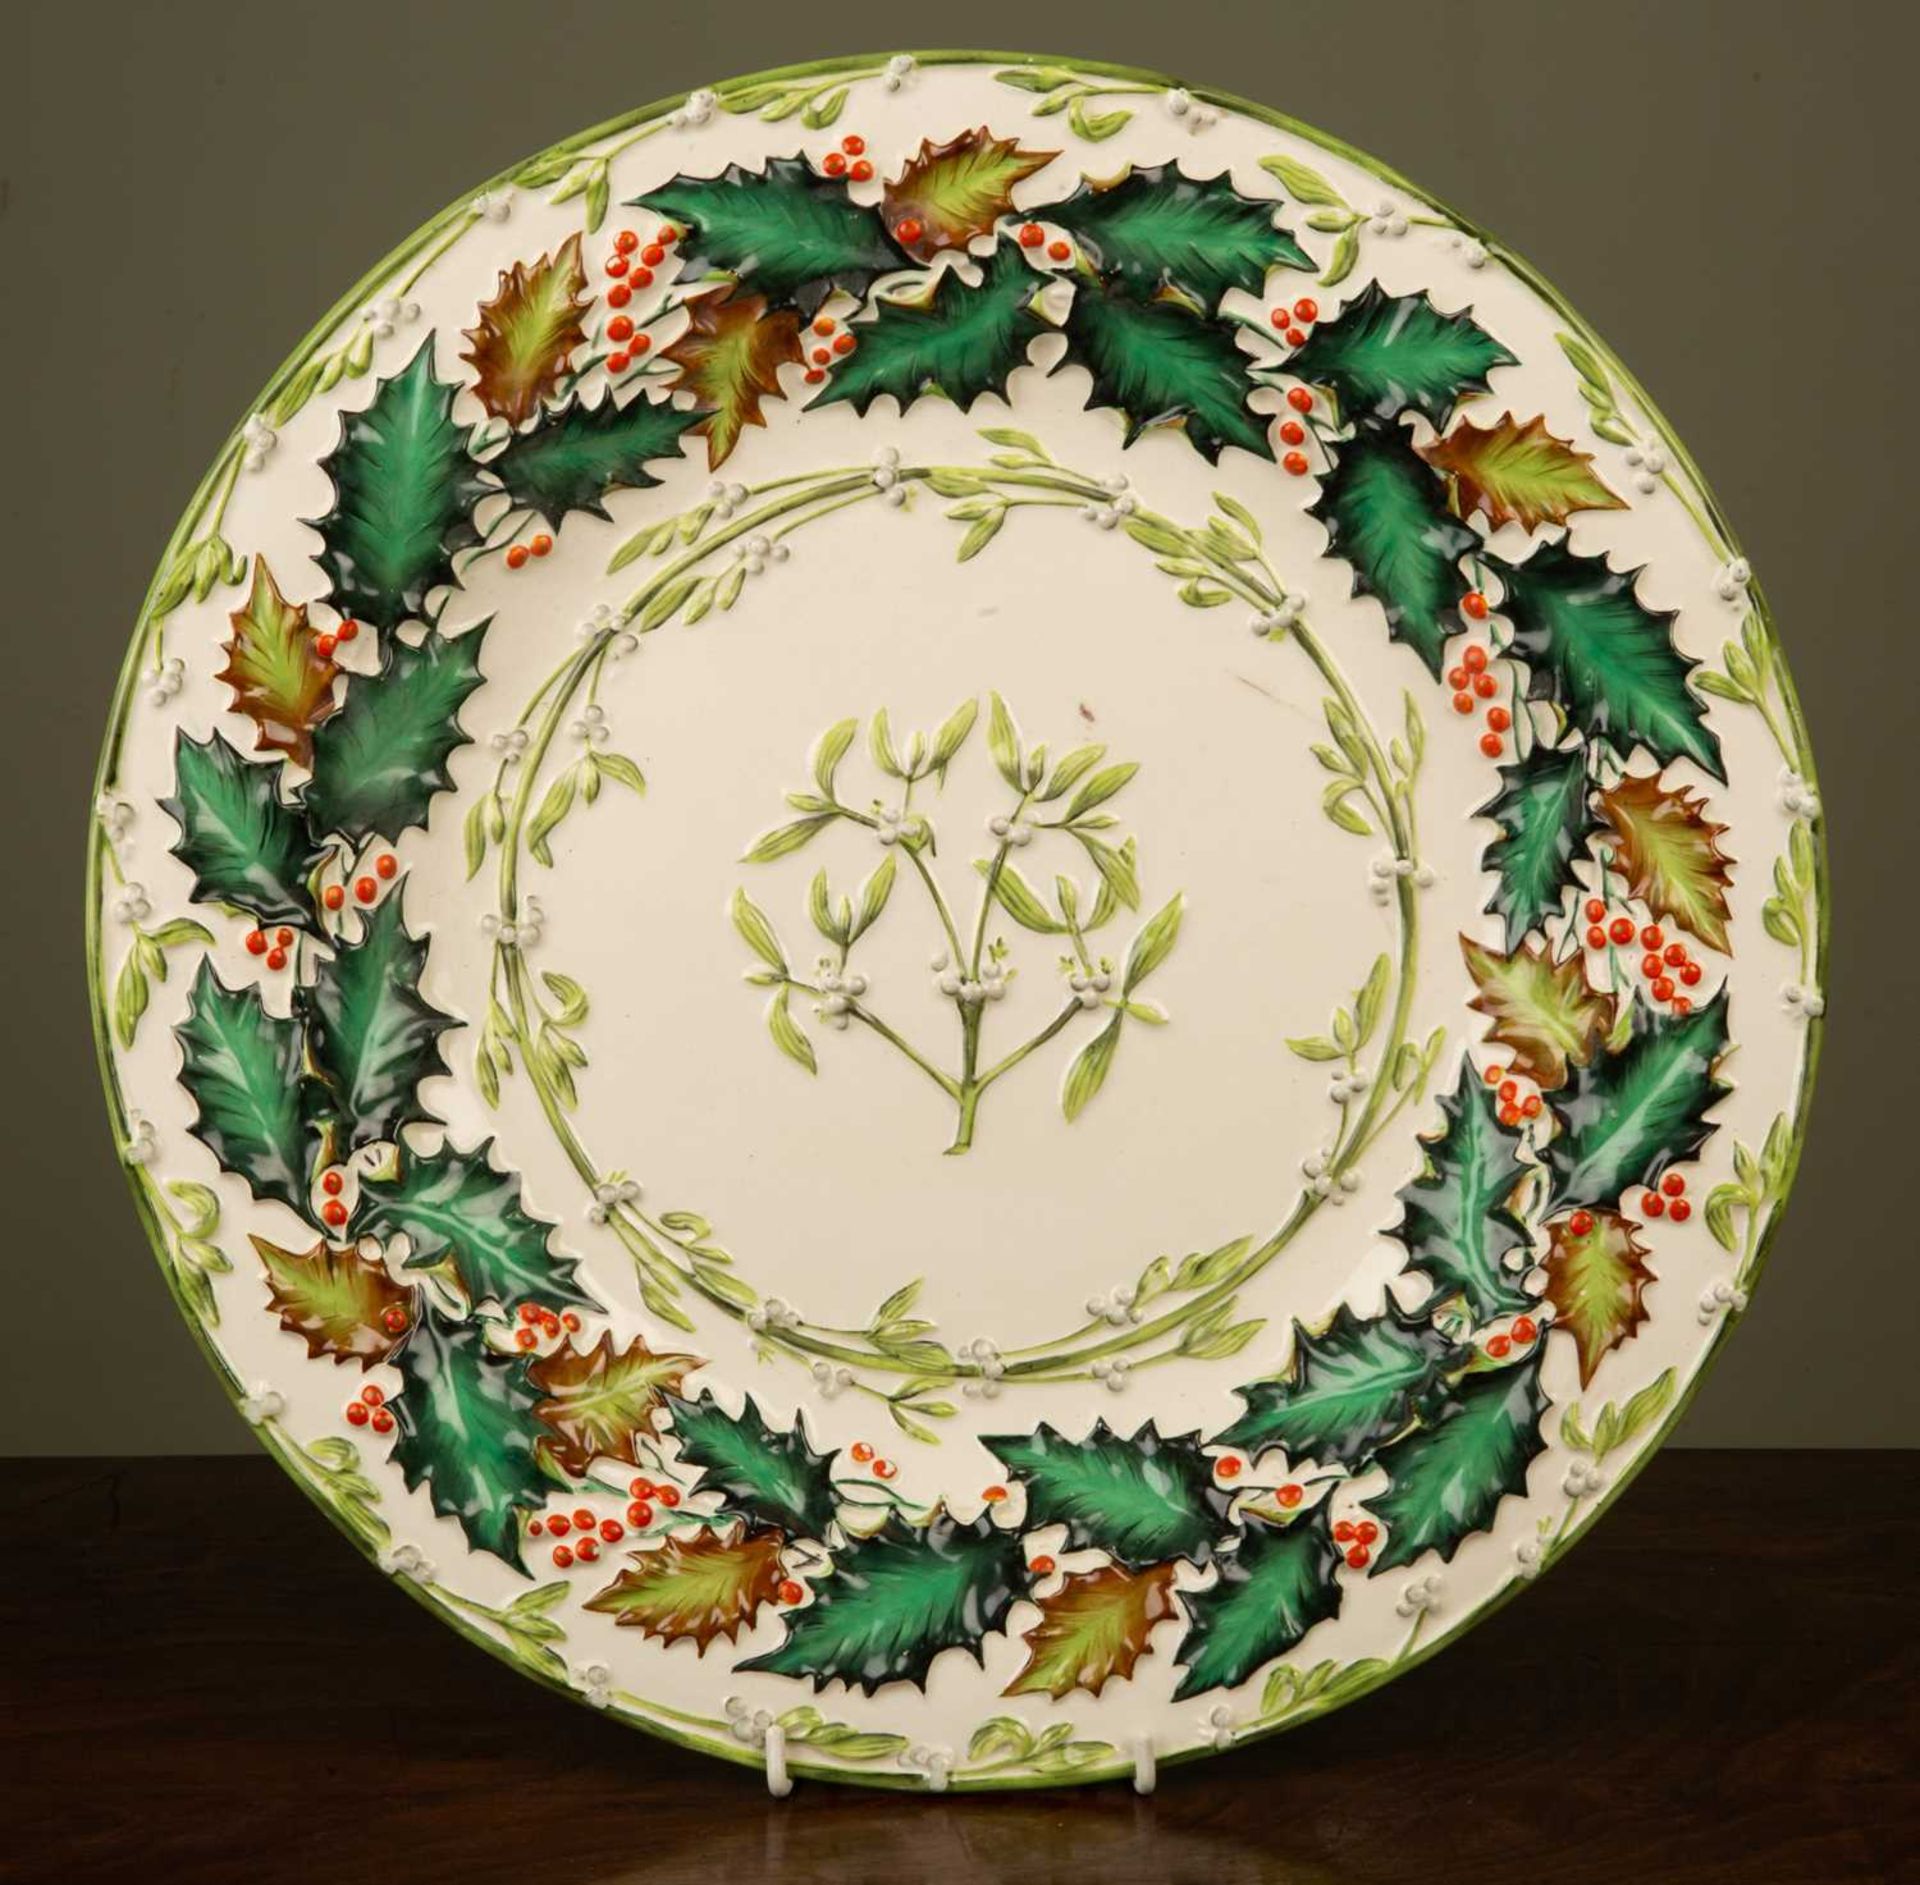 An early 20th century Copeland late Spode Christmas dish decorated in light relief with holly and